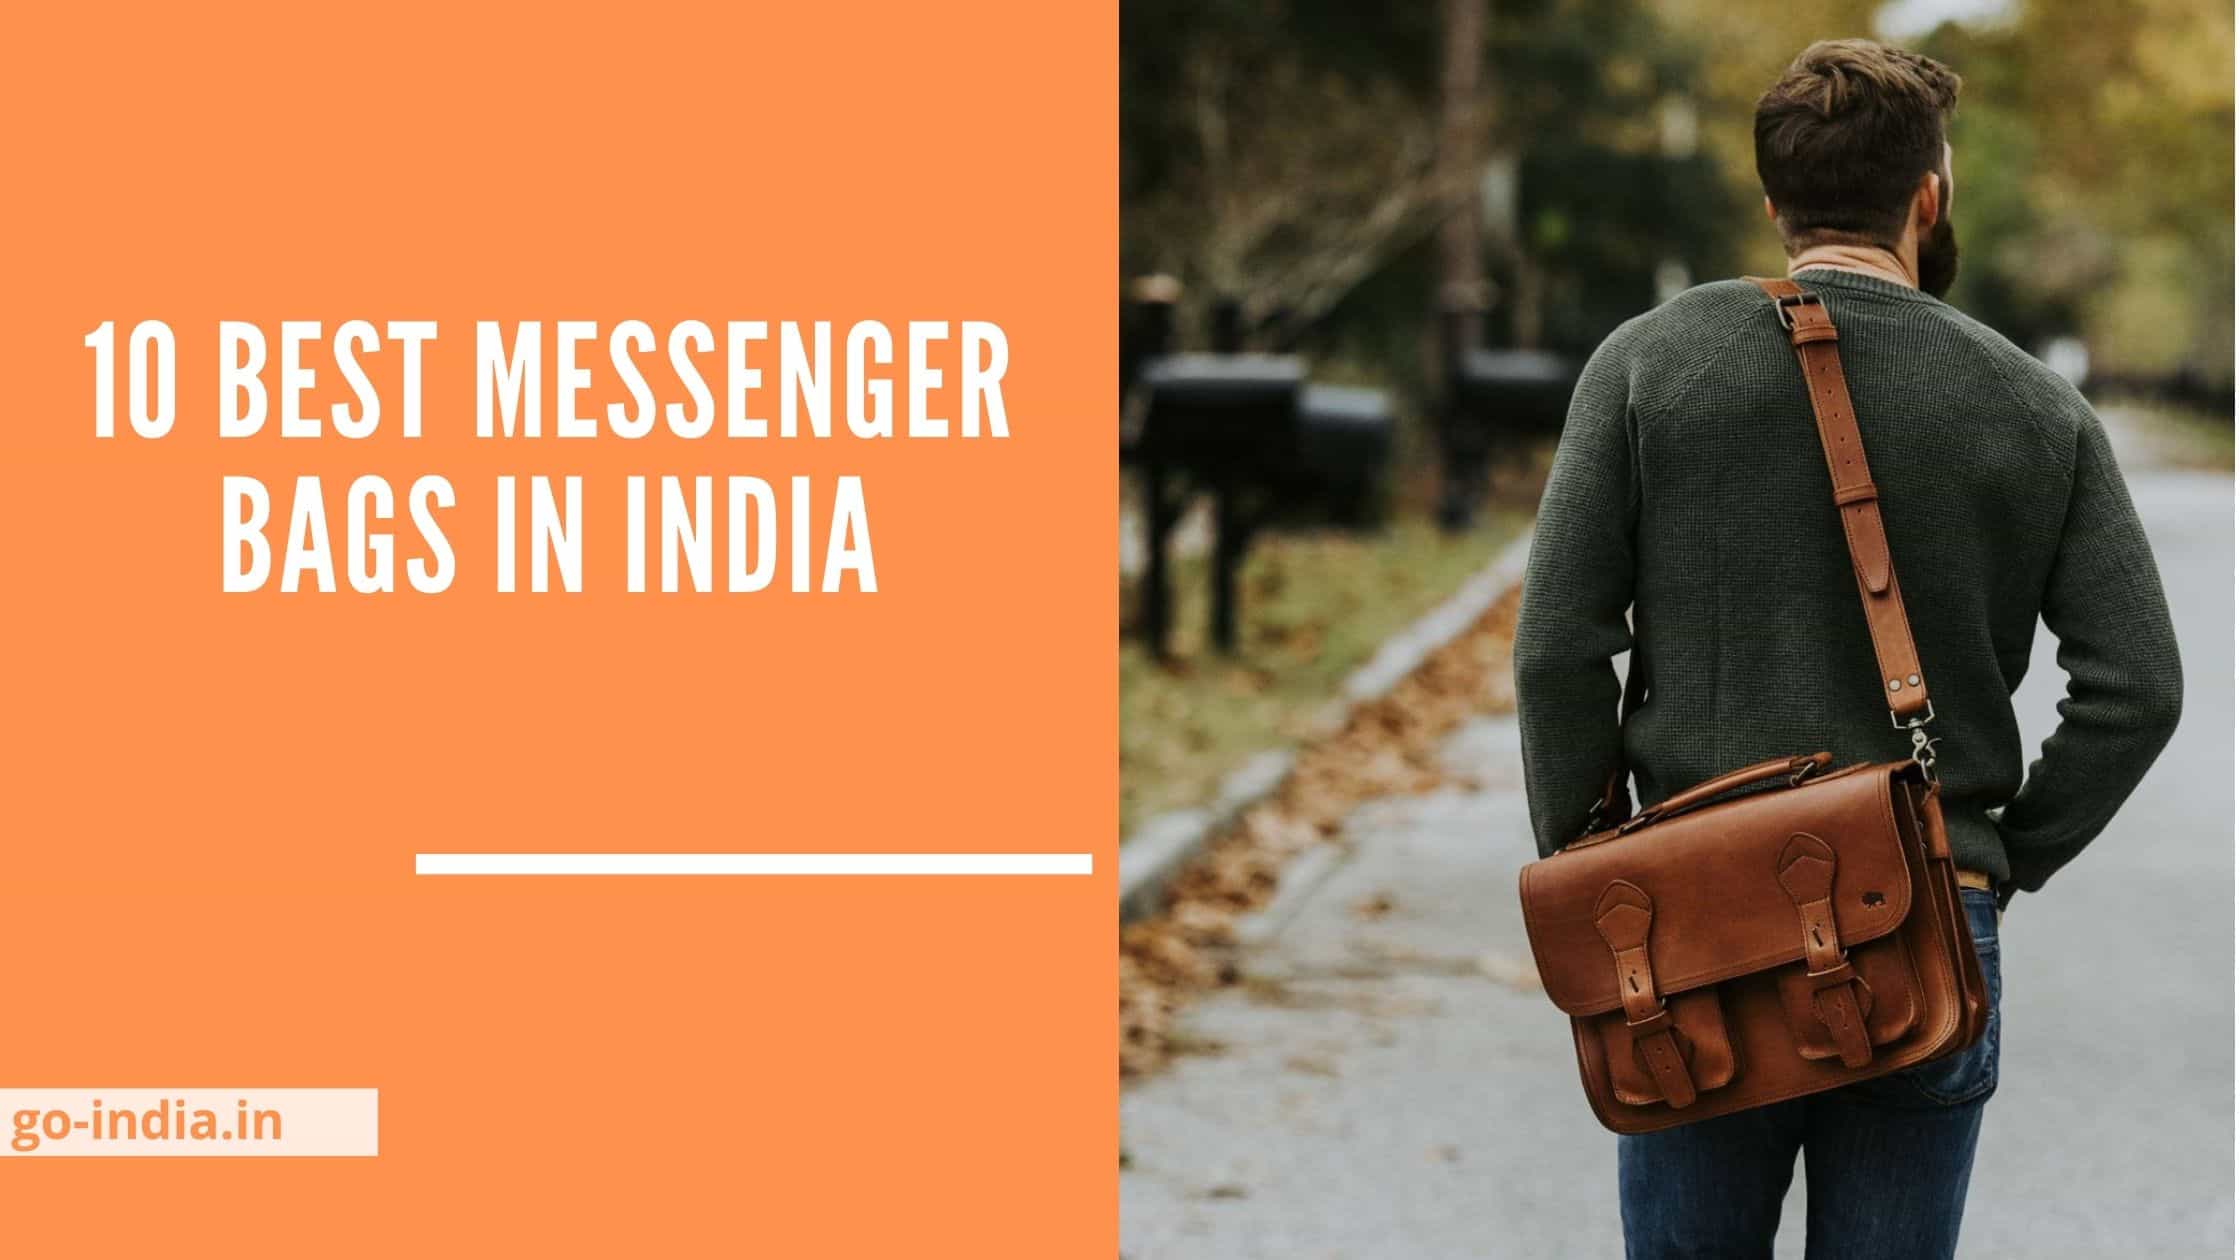 10 Best Messenger Bags In India